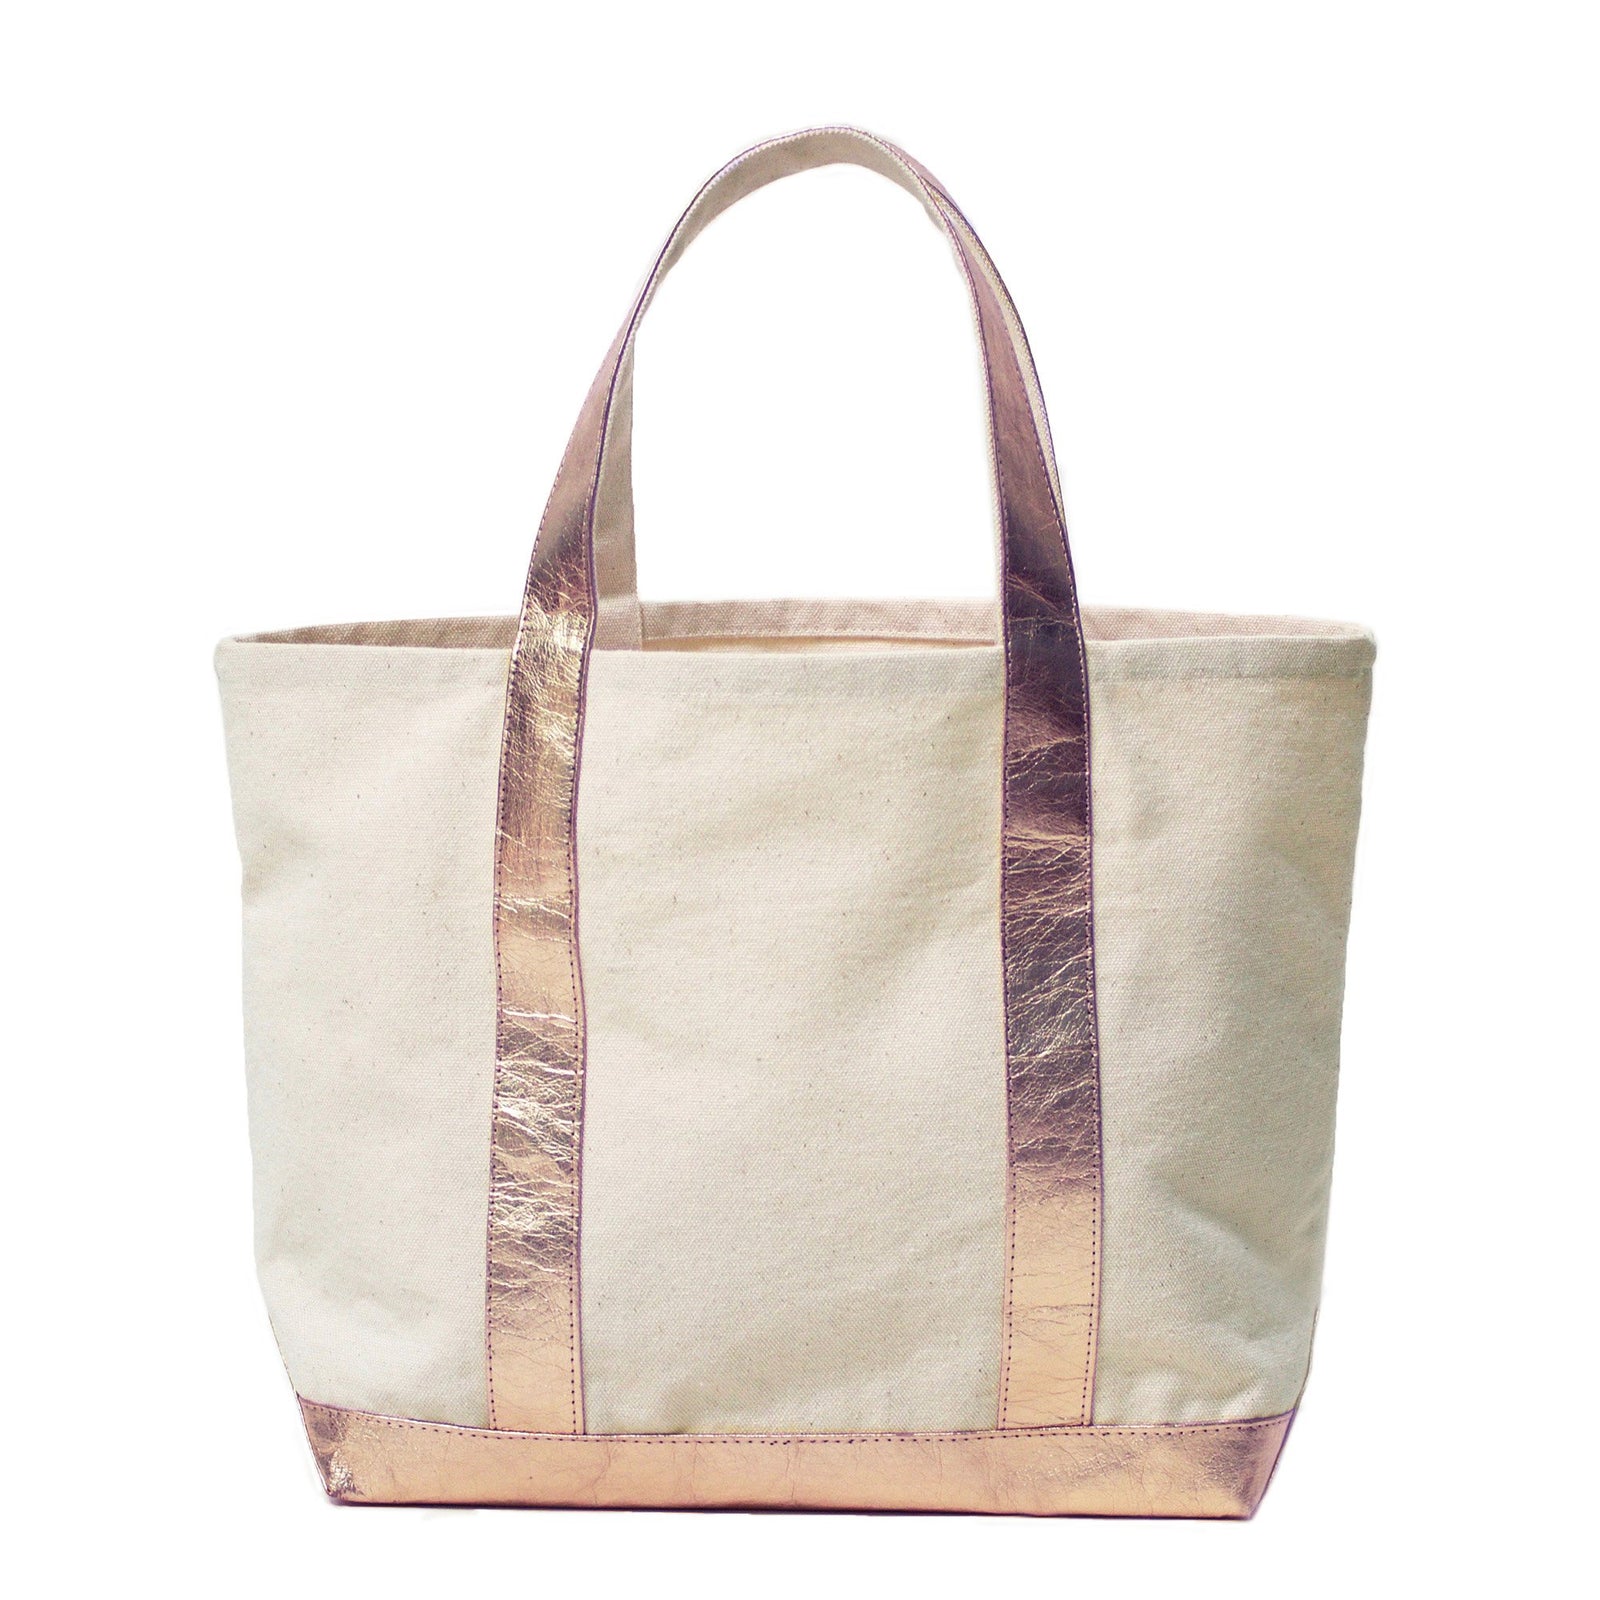 Handmade, Sustainable & Artisan Bags - Temples and Markets